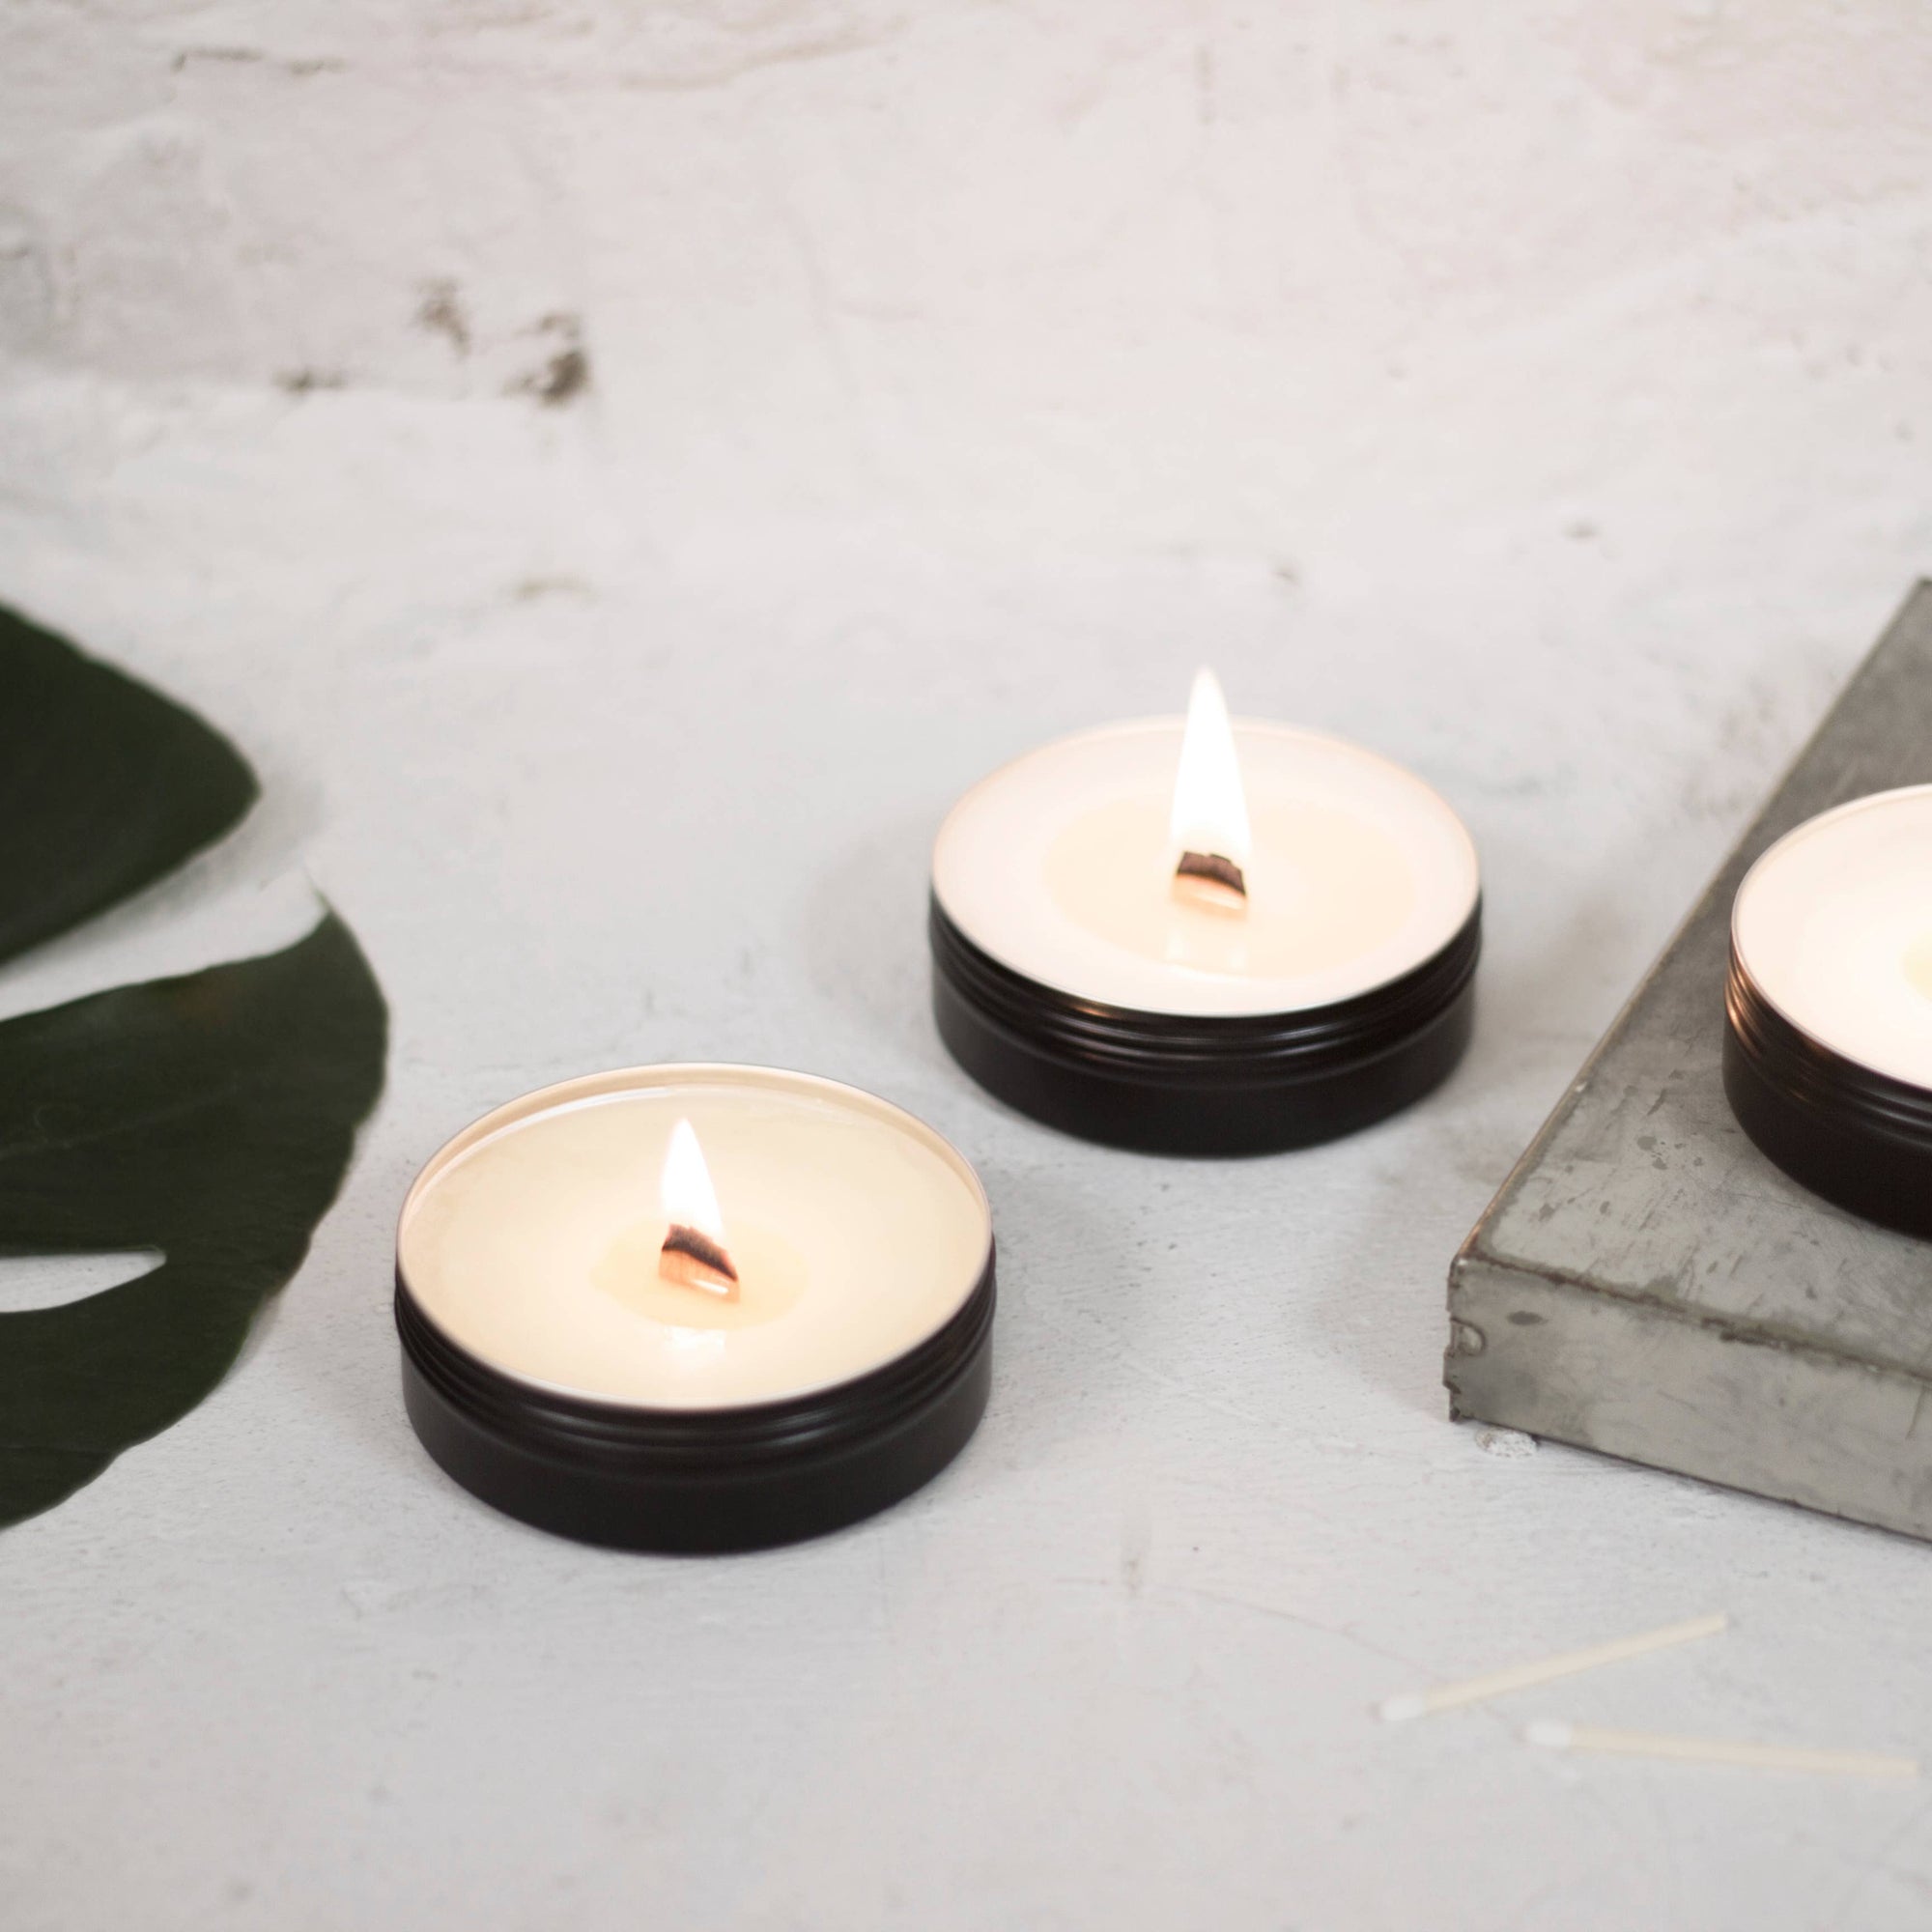 Tea Tree + Peppermint Travel Candle by Sable Candle Co.